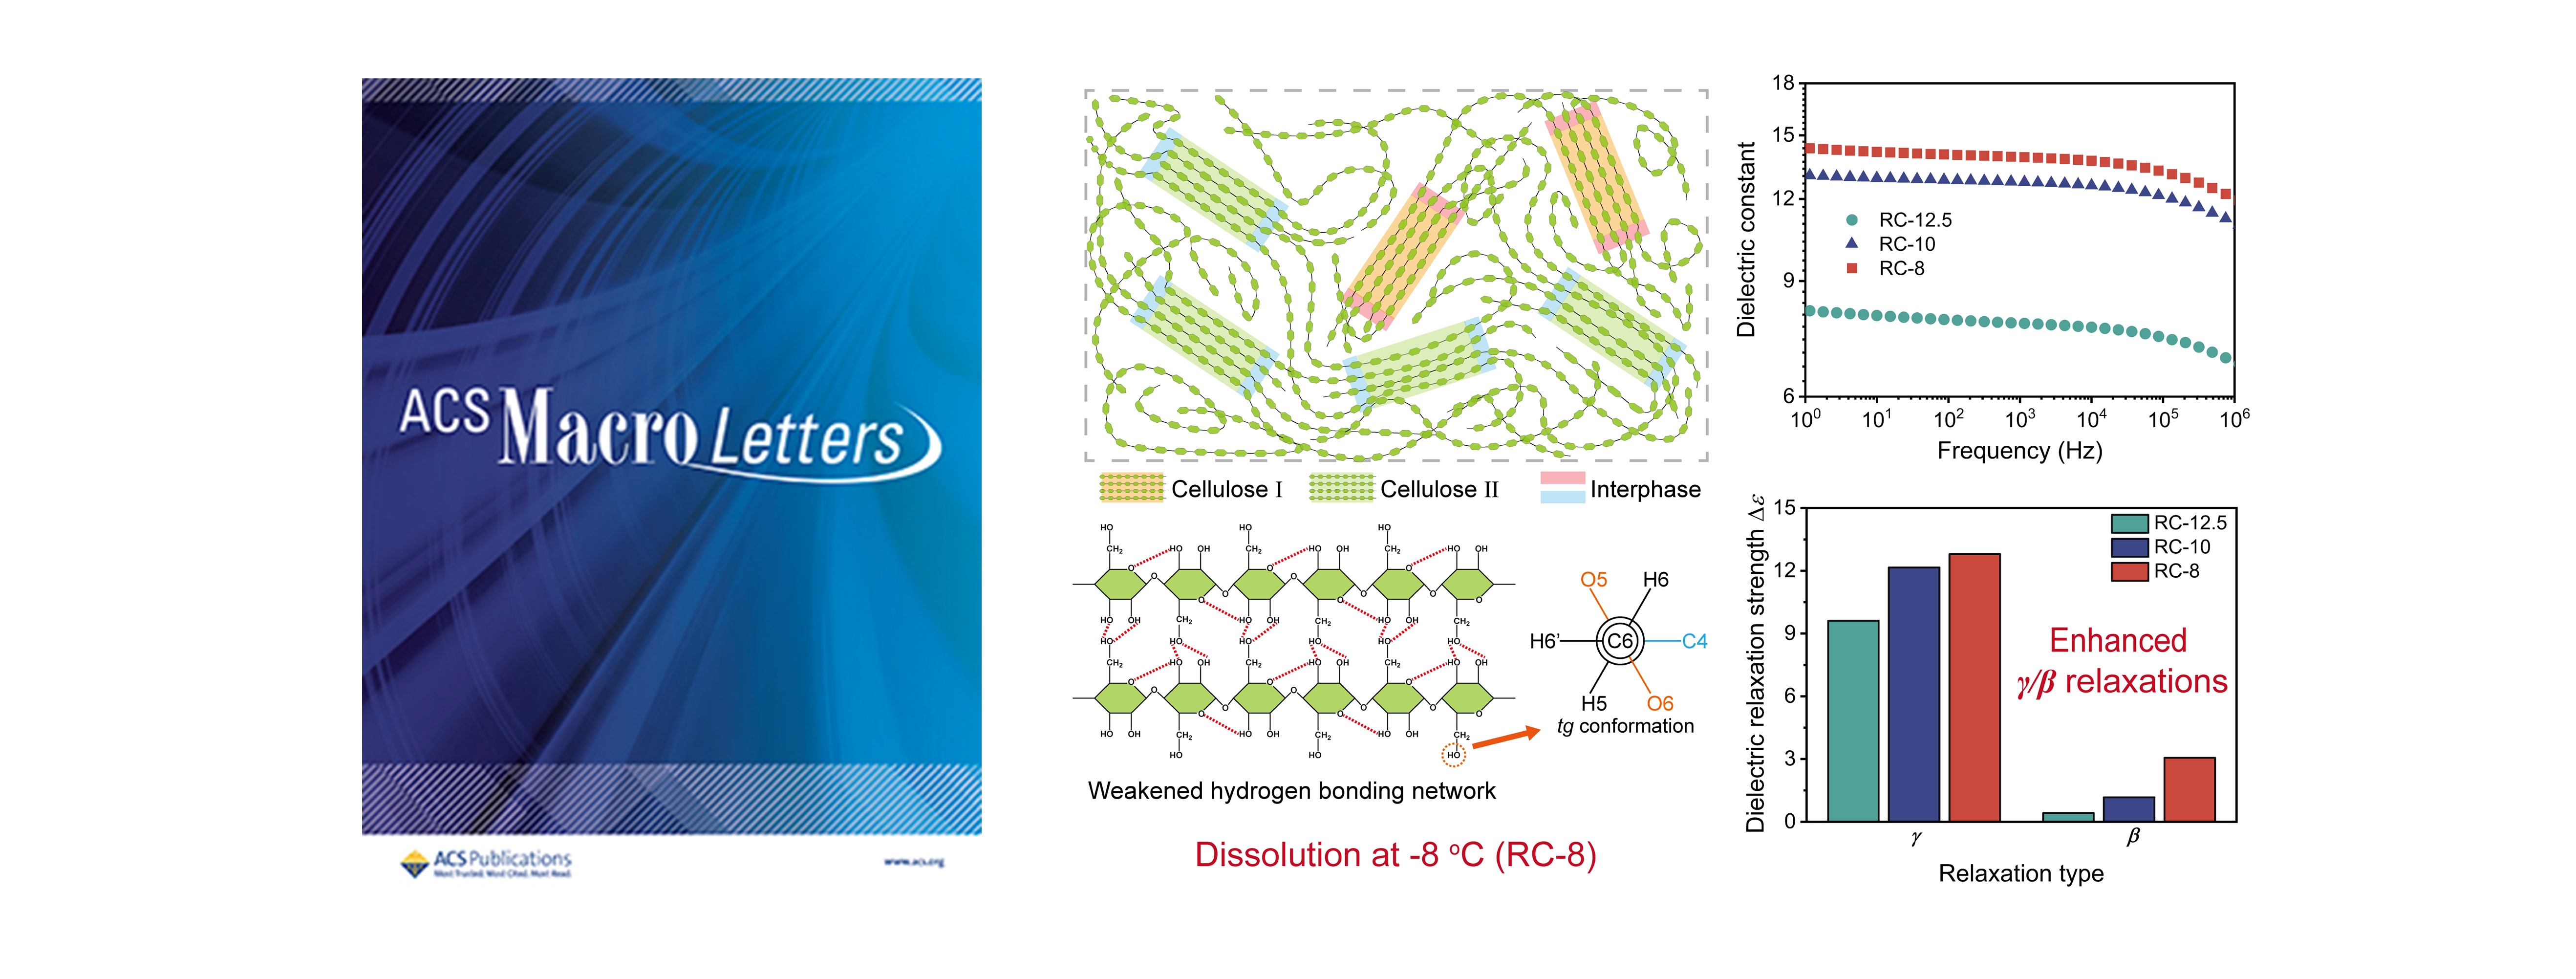 Research on all-cellulose dielectric materials published in ACS Macro Letters